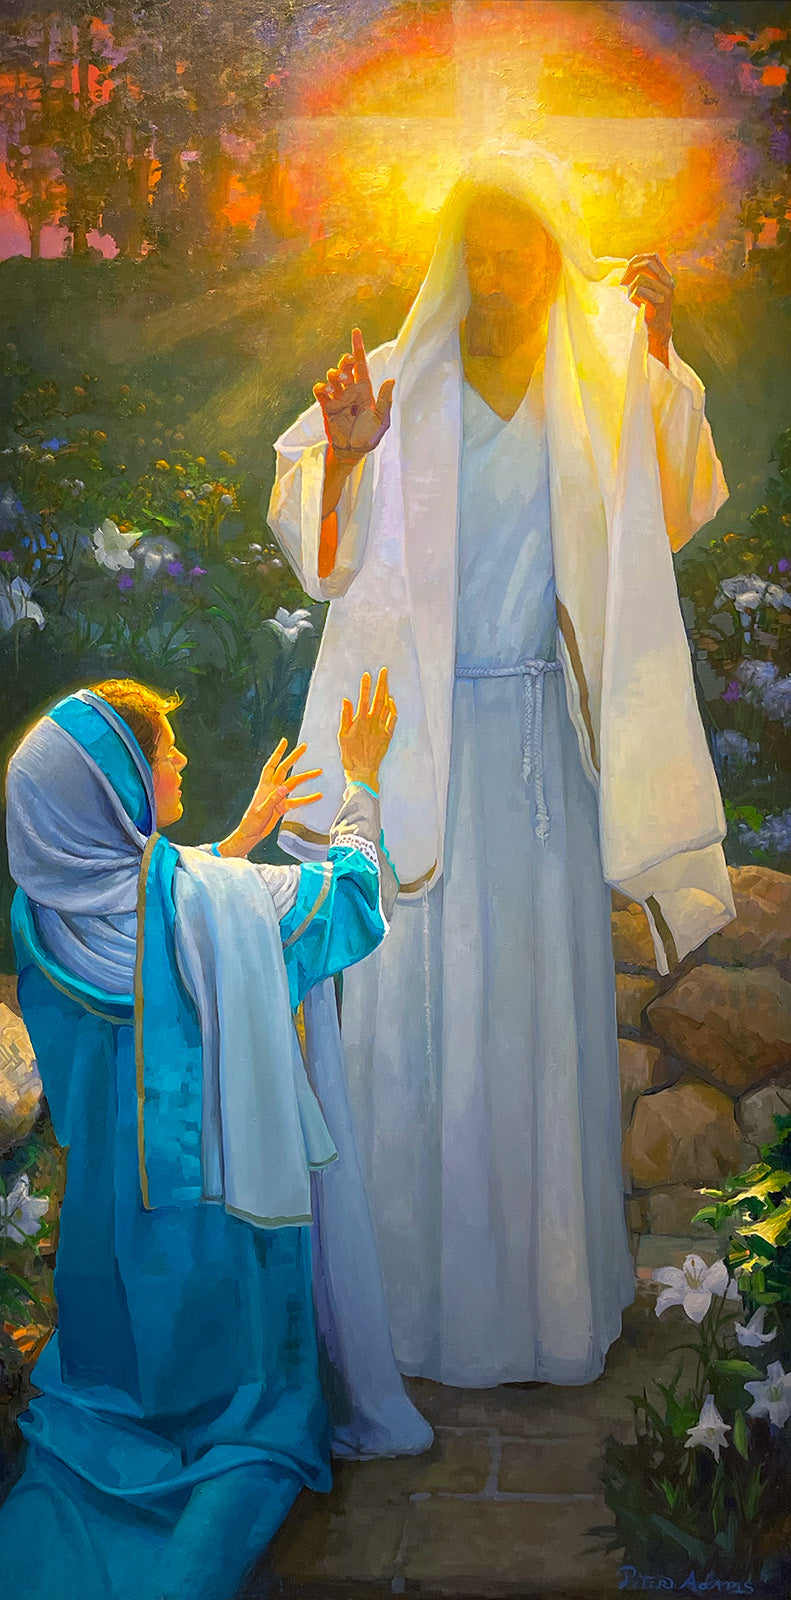 The Resurrection by Peter Adams